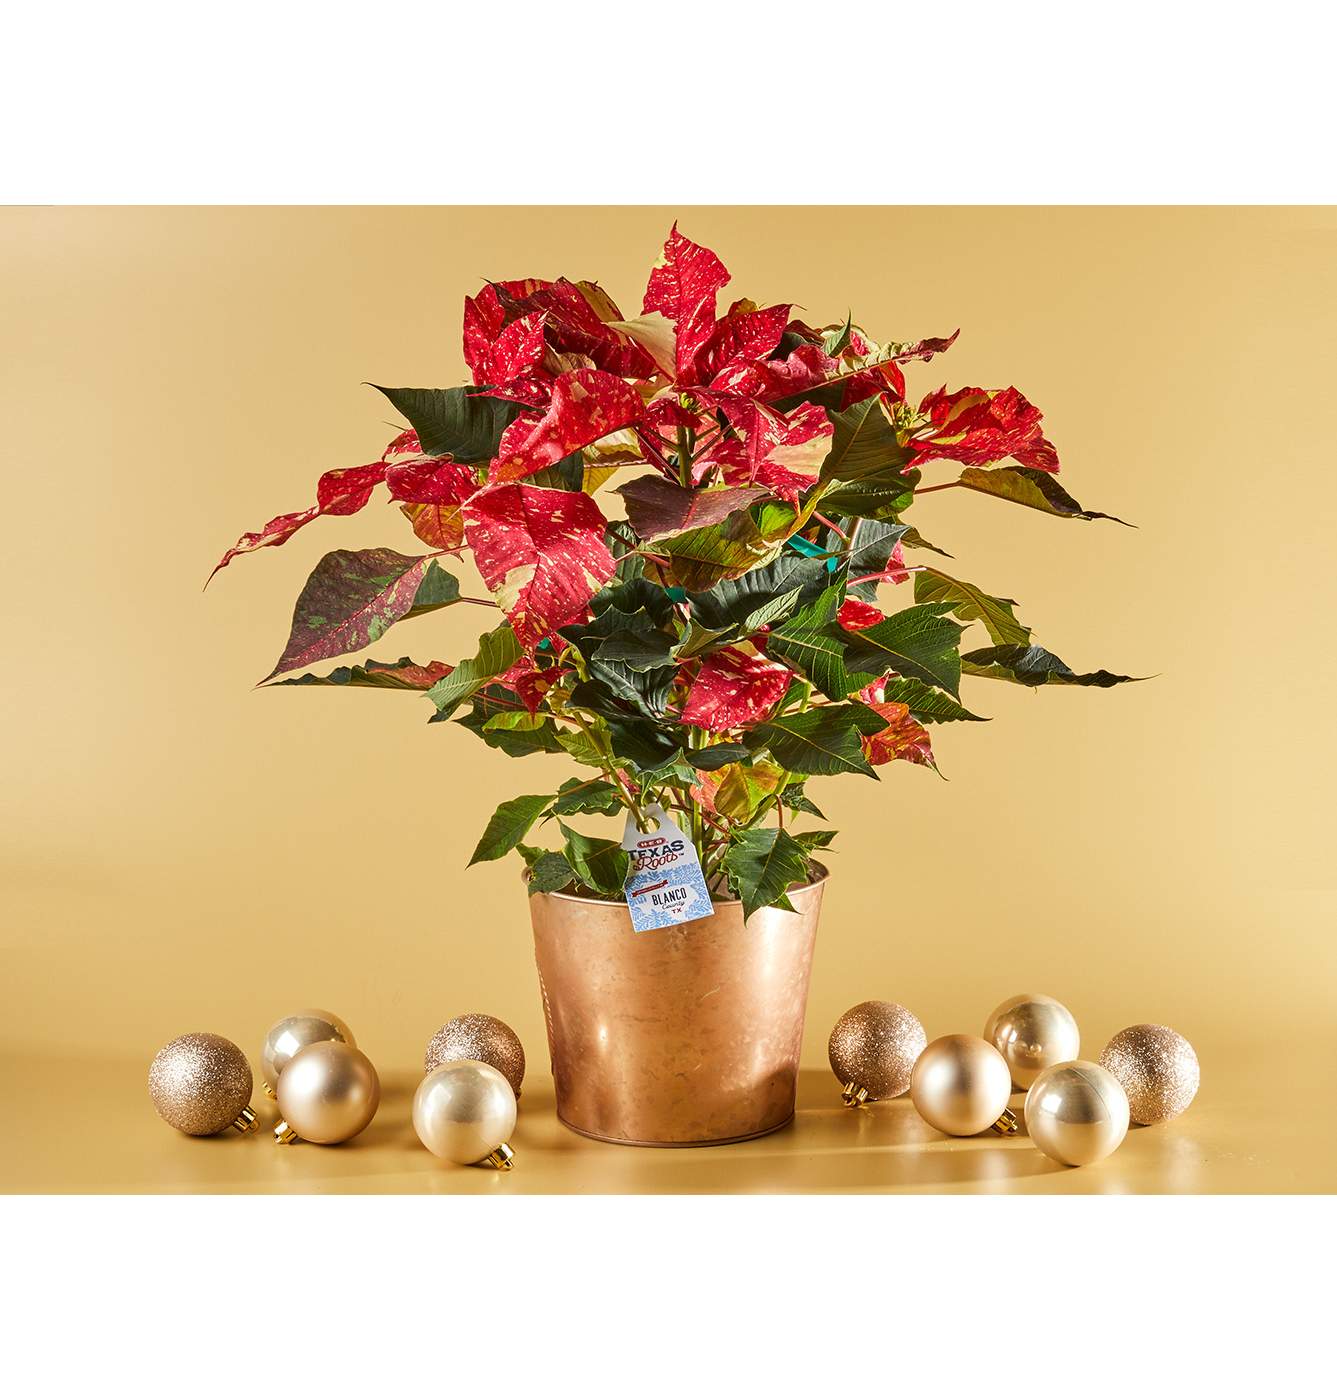 H-E-B Texas Roots Texas Two Step Potted Poinsettia; image 2 of 3